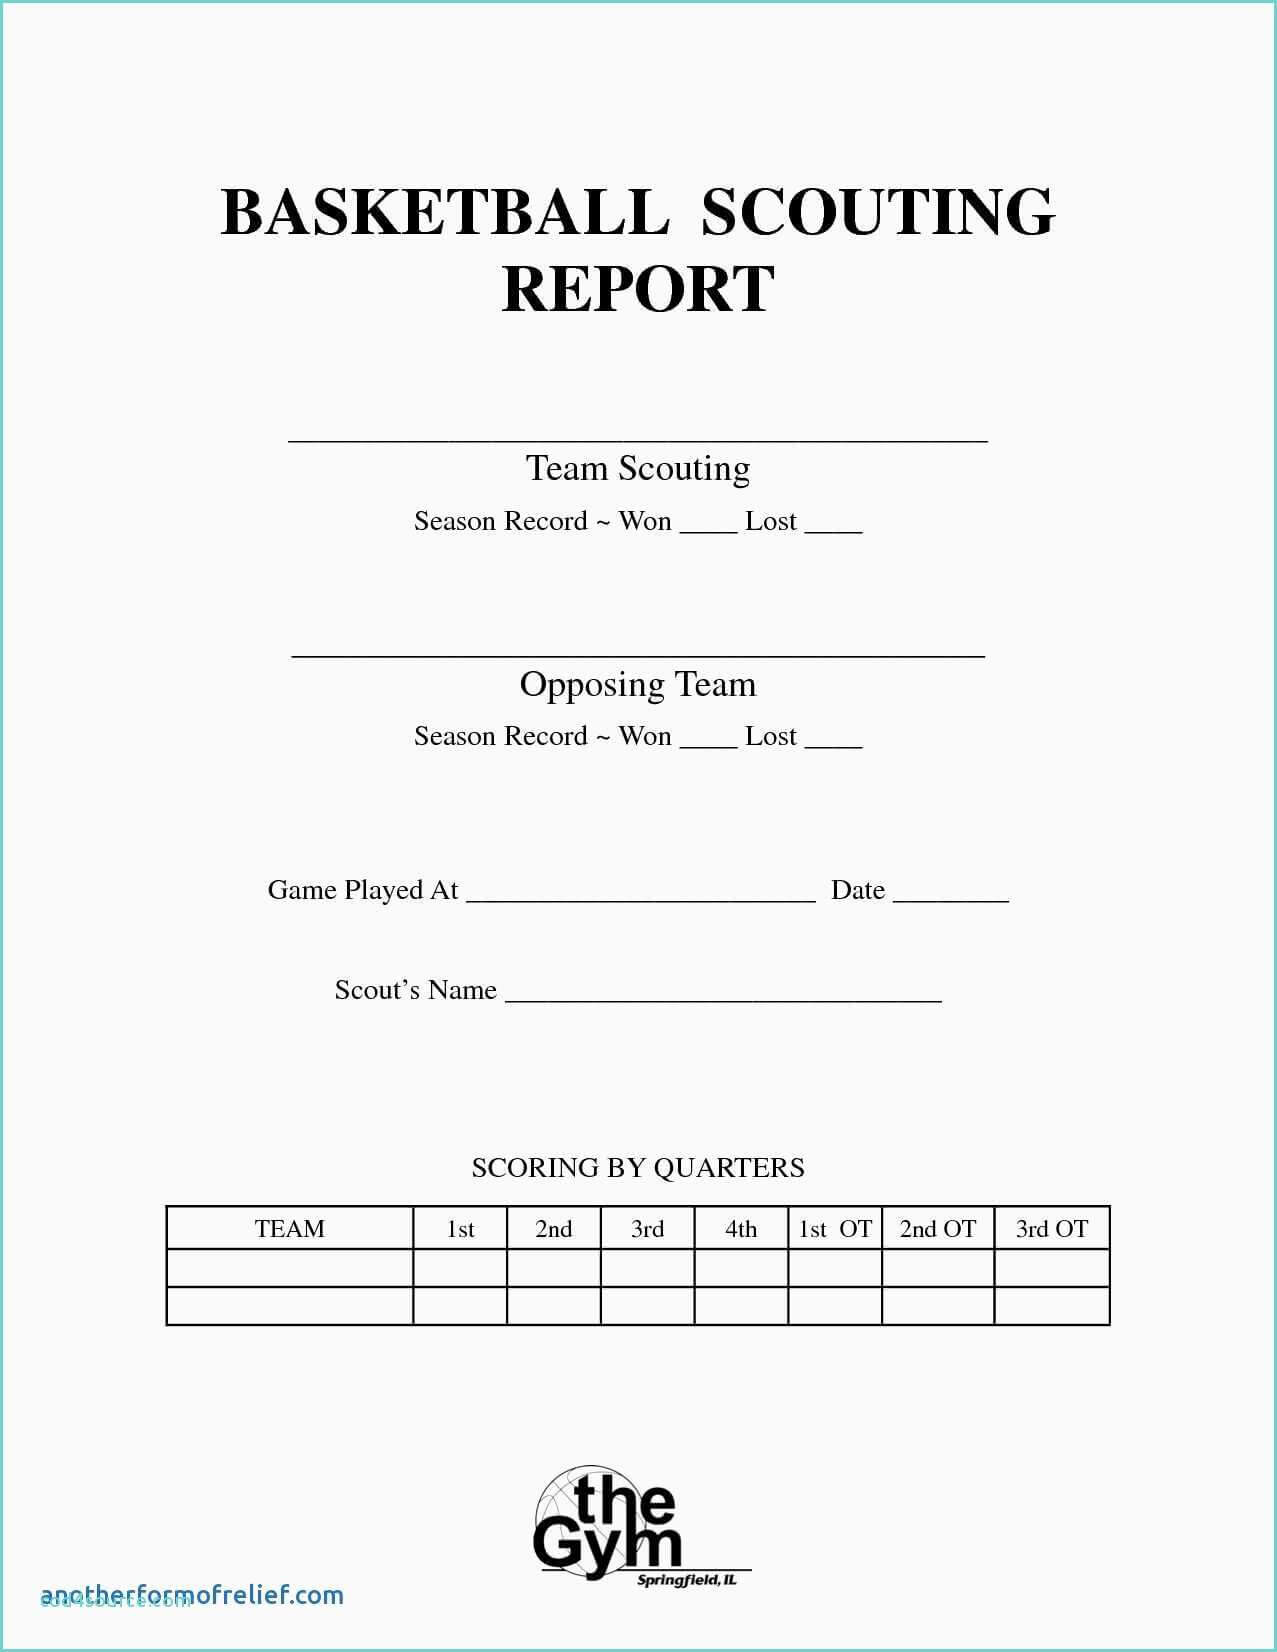 Scouting Report Template Download Baseball Pdf Football With Regard To Baseball Scouting Report Template